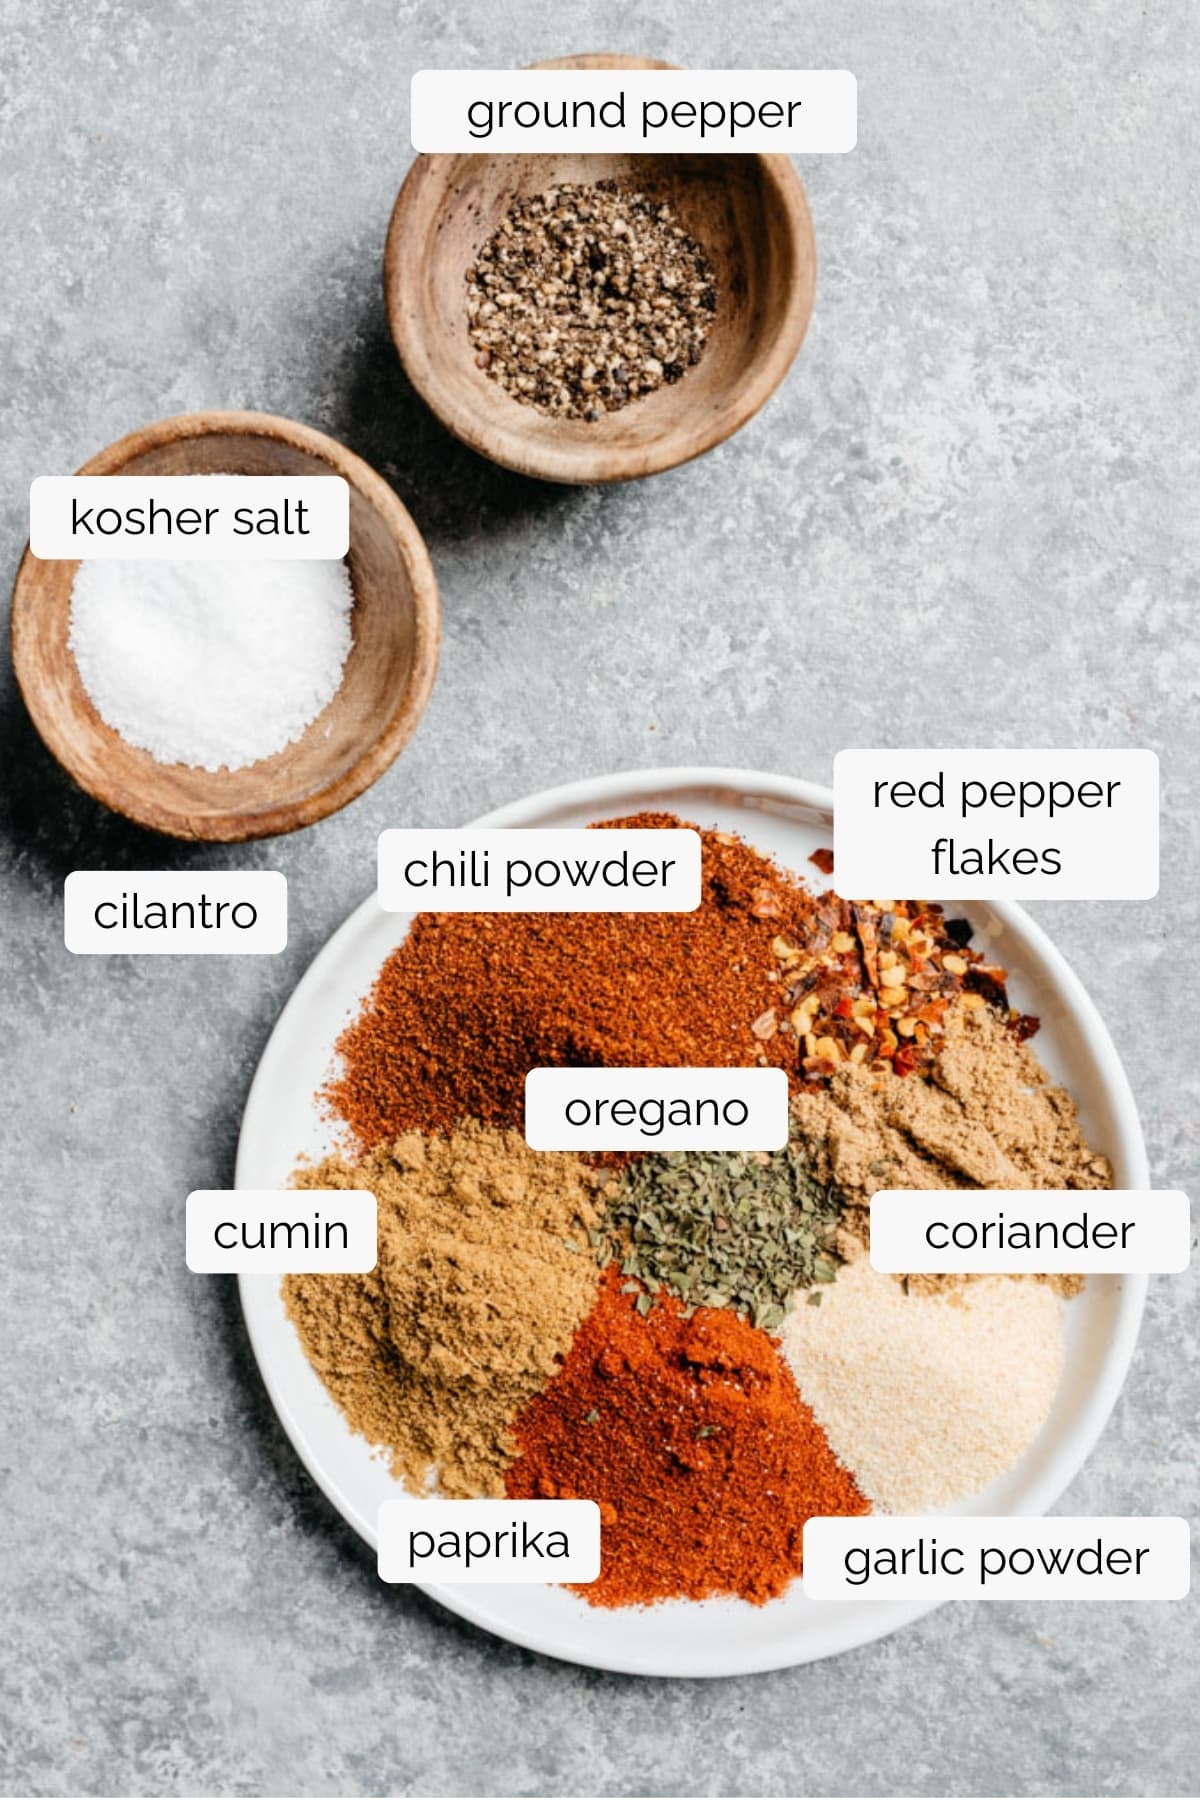 The spices for homemade taco seasoning arranged on a white plate and in small bowls on a concrete background.